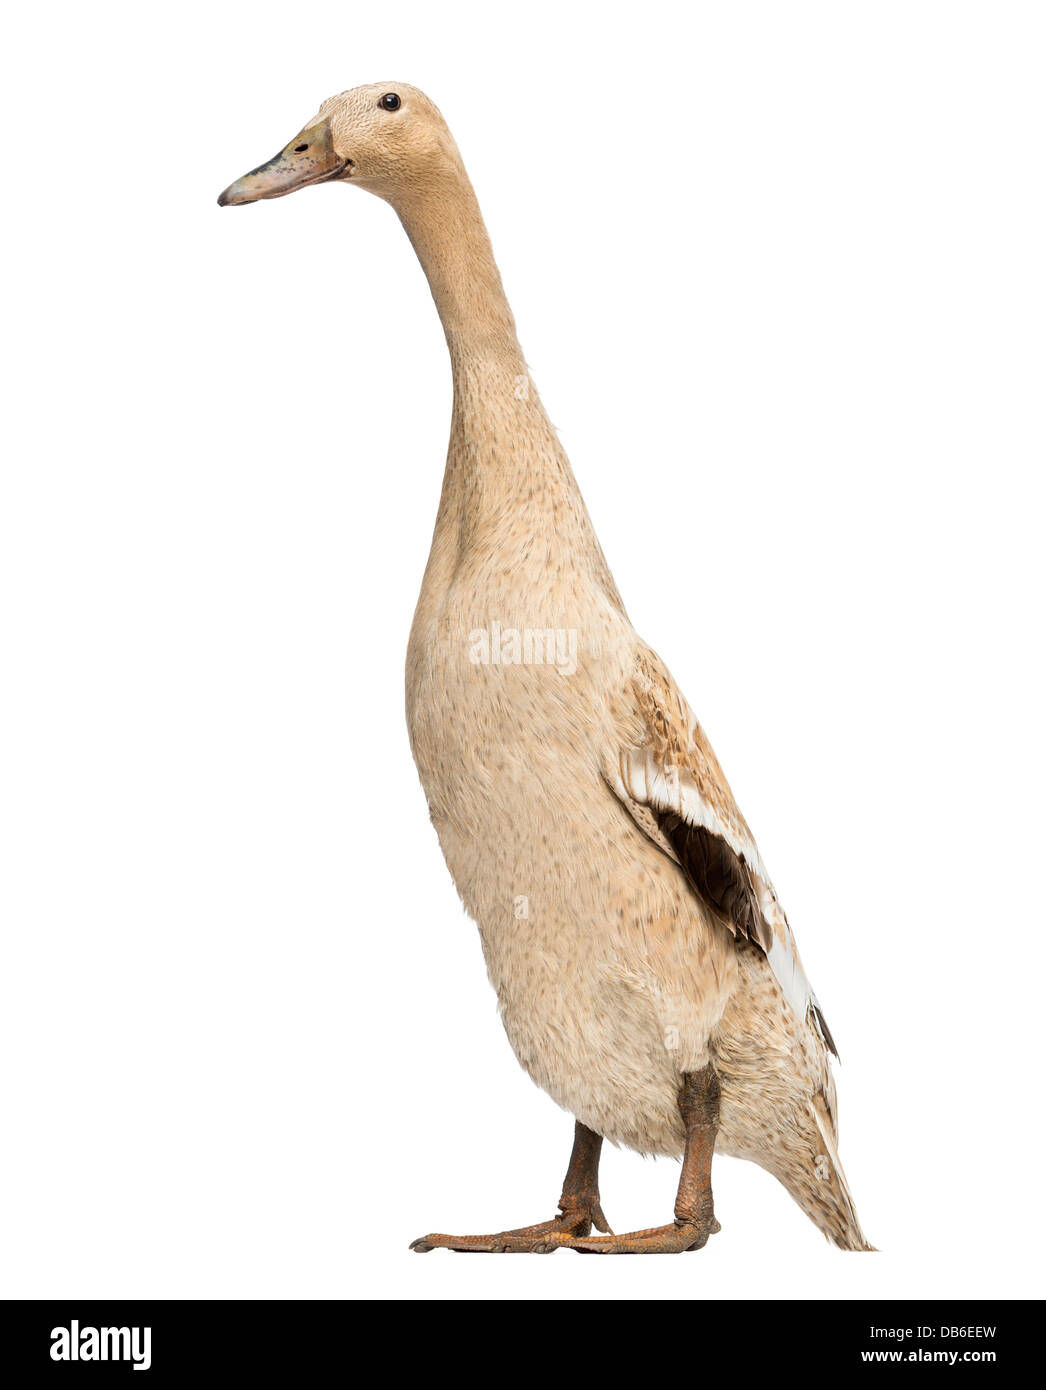 Female Indian Runner Duck, Anas platyrhynchos domesticus, standing against white background Stock Photo